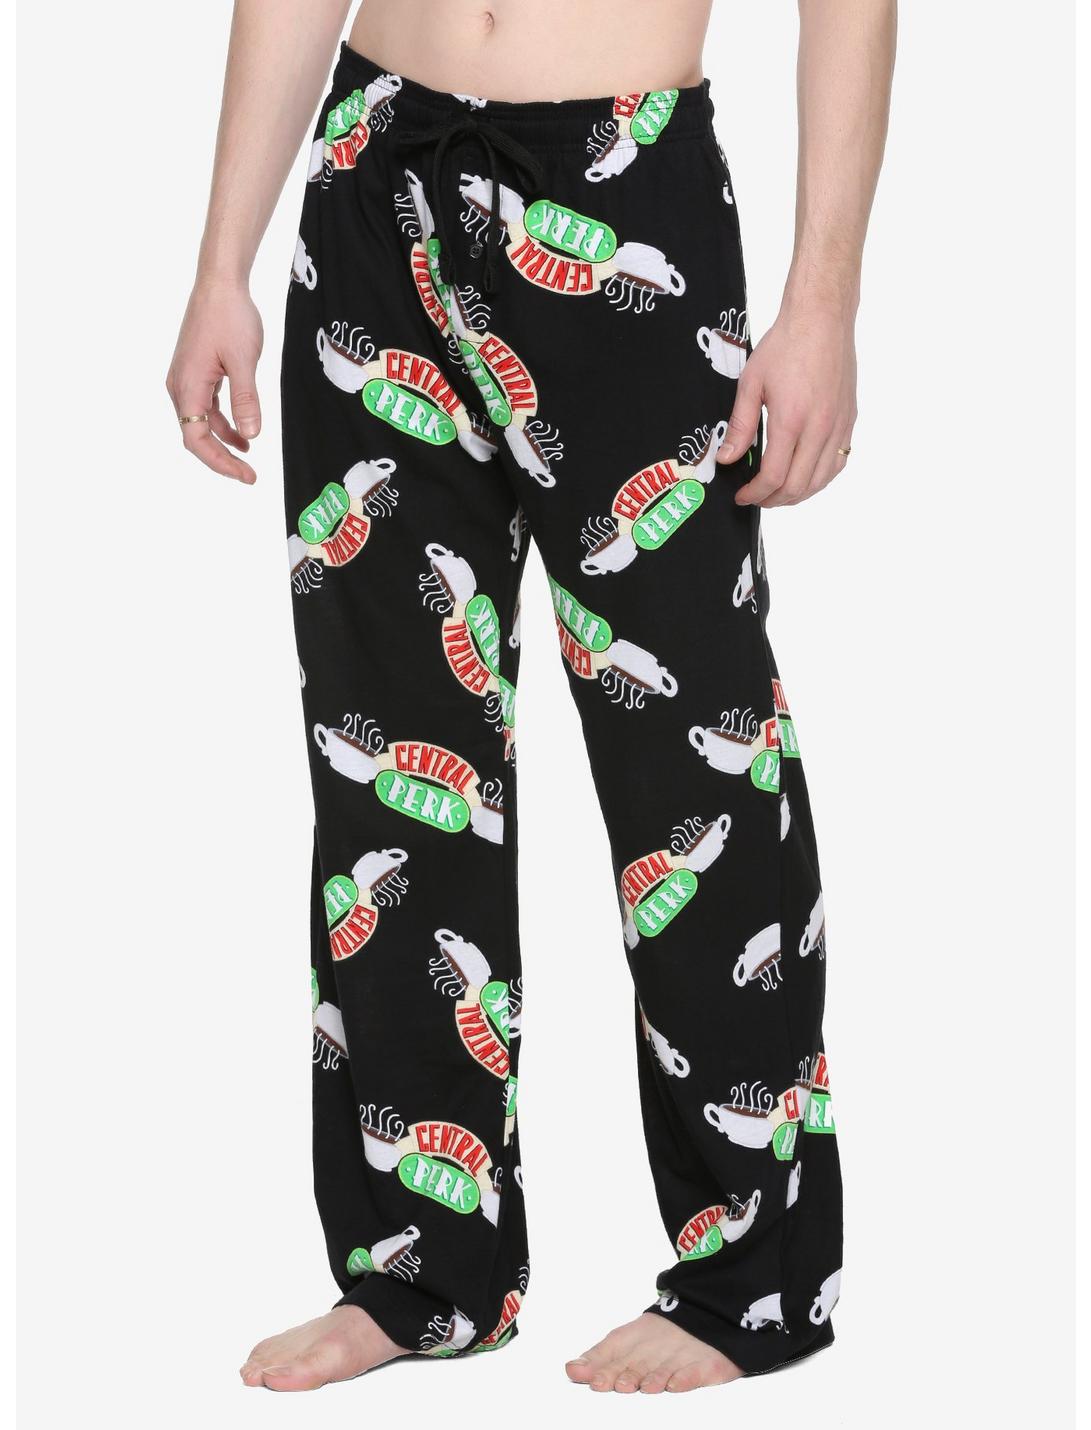 Friends Central Perk Sleep Pants - BoxLunch Exclusive, BLACK, hi-res